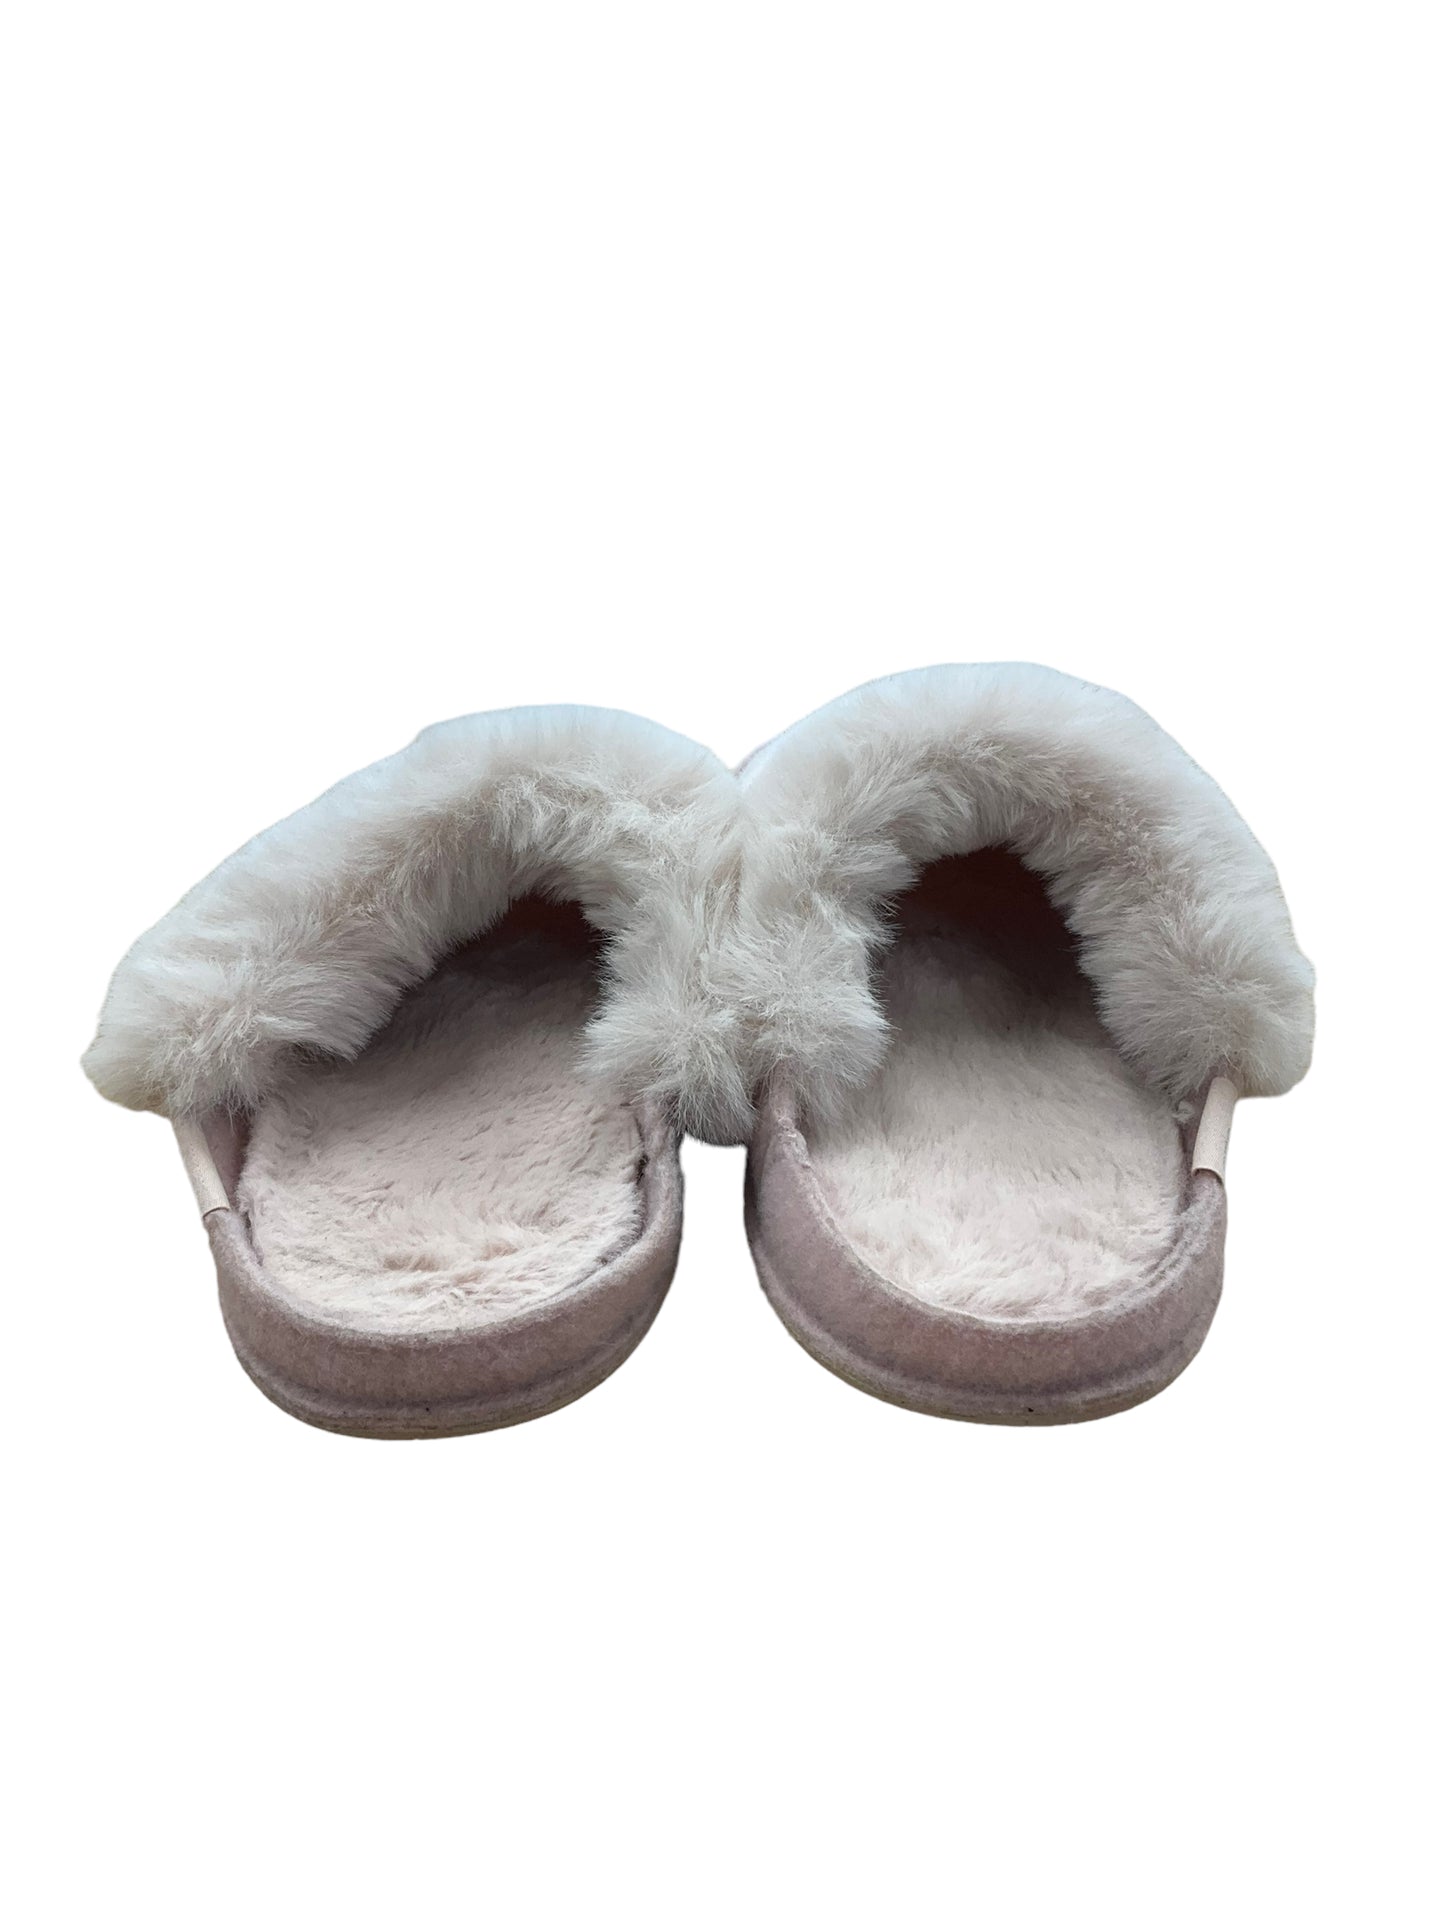 Slippers By Crocs  Size: 8